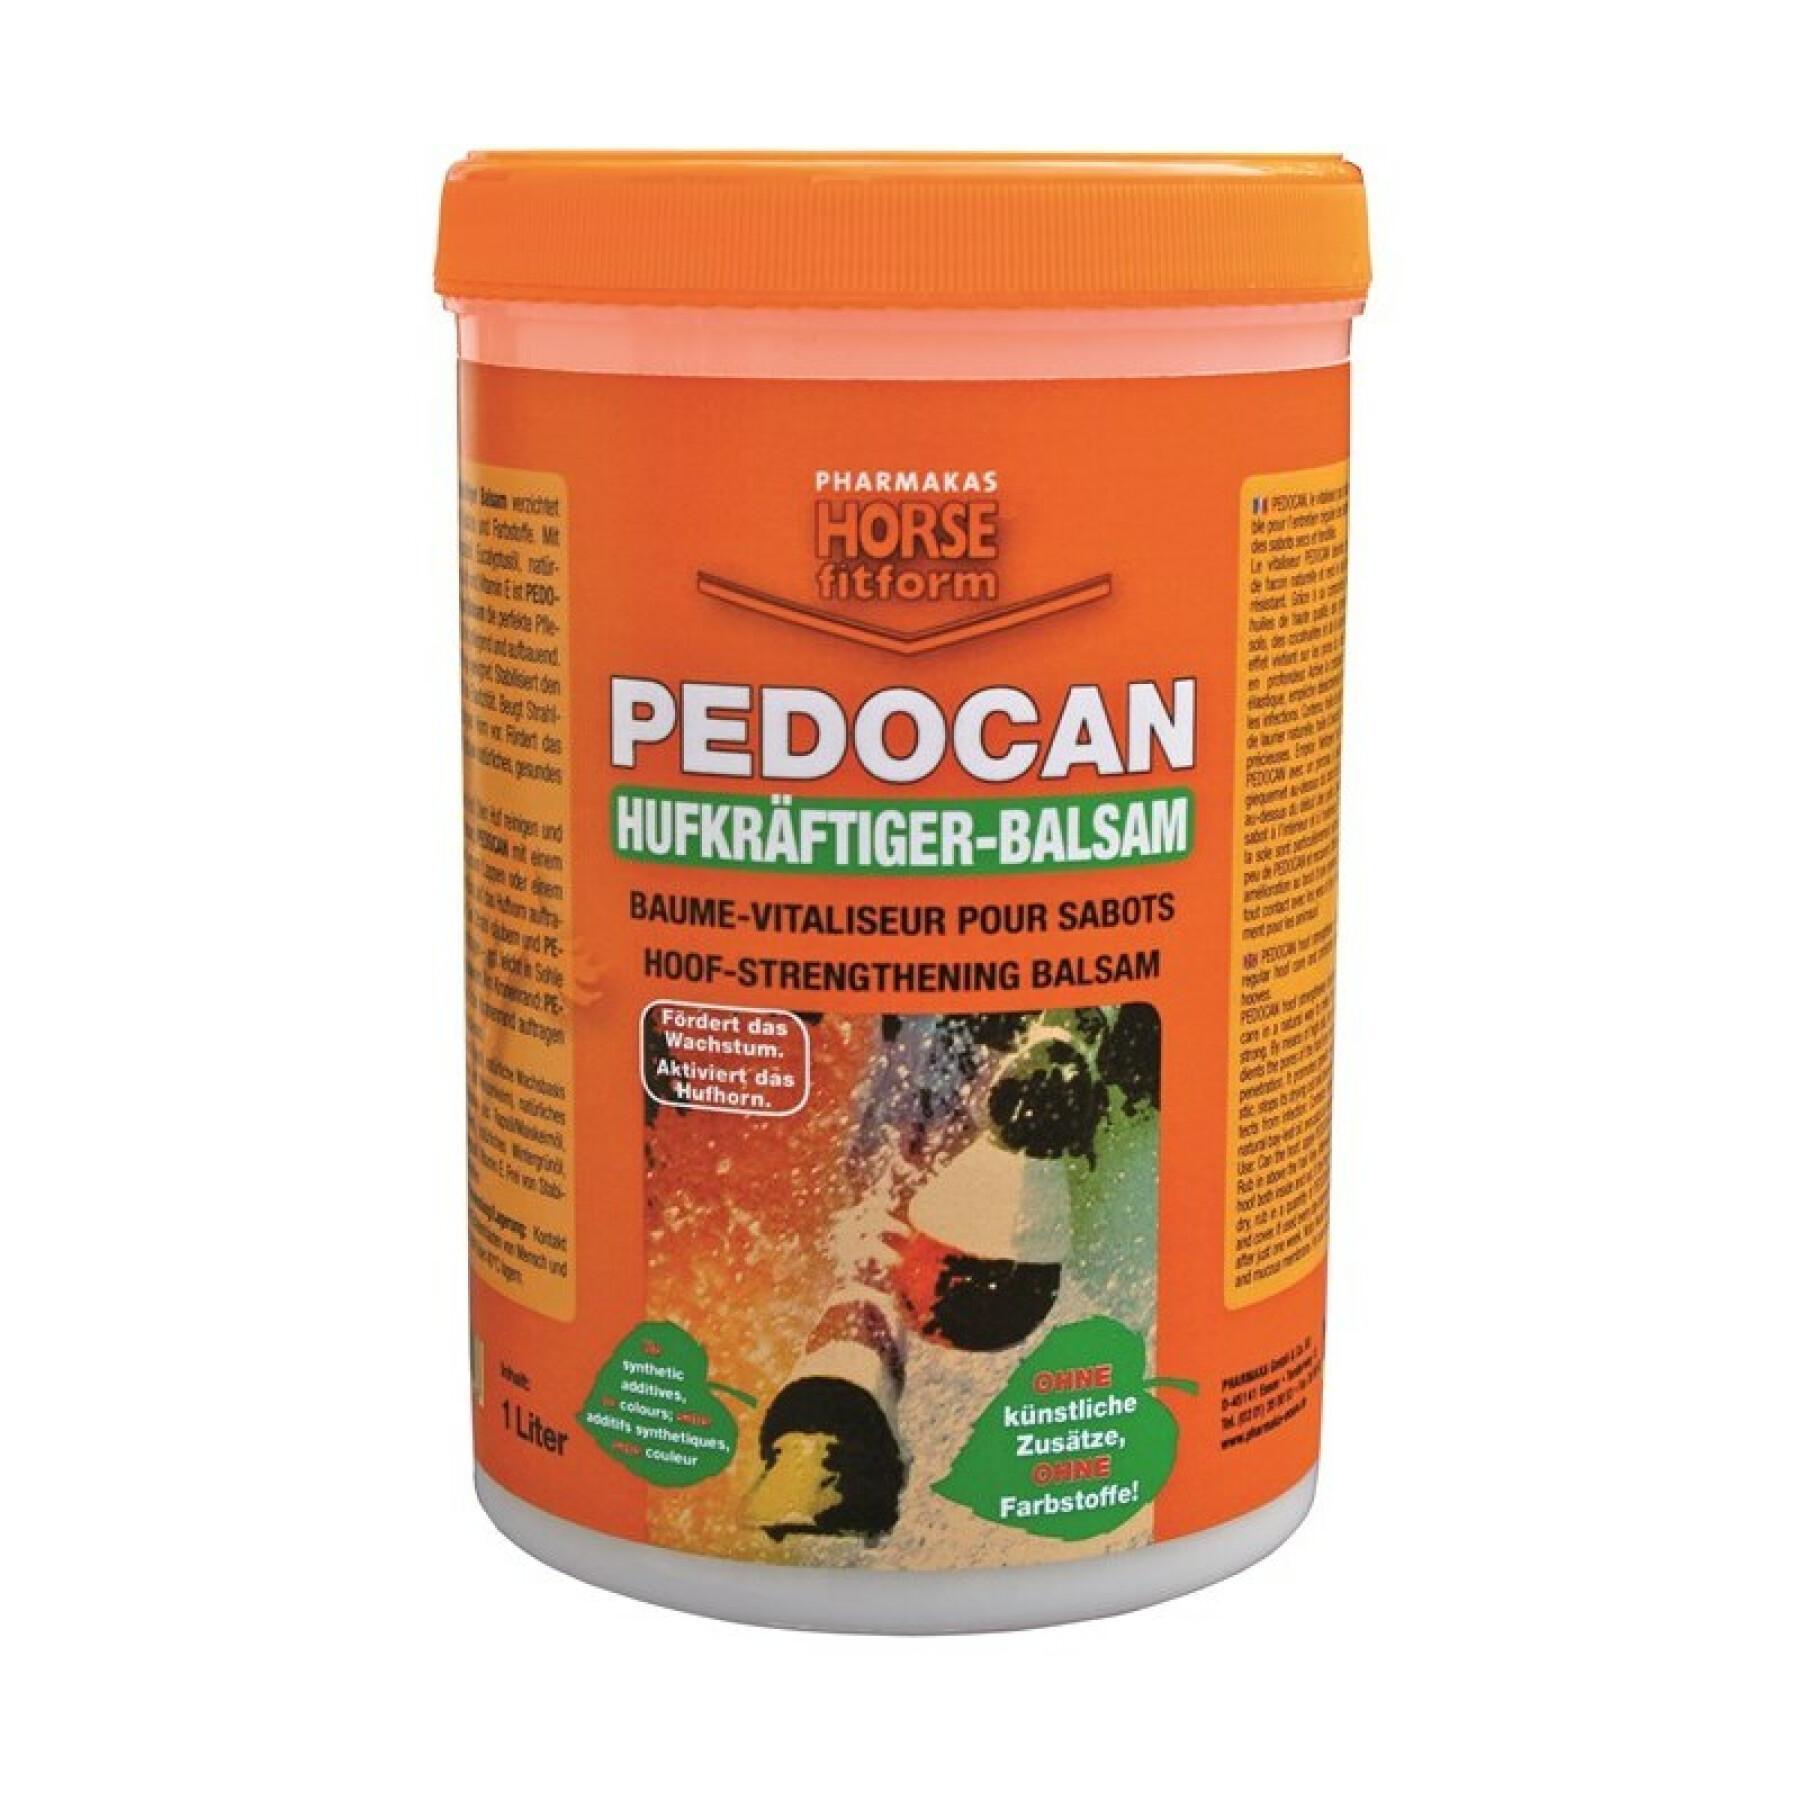 Huile sabot pour cheval Pharmaka Pedocan 1l